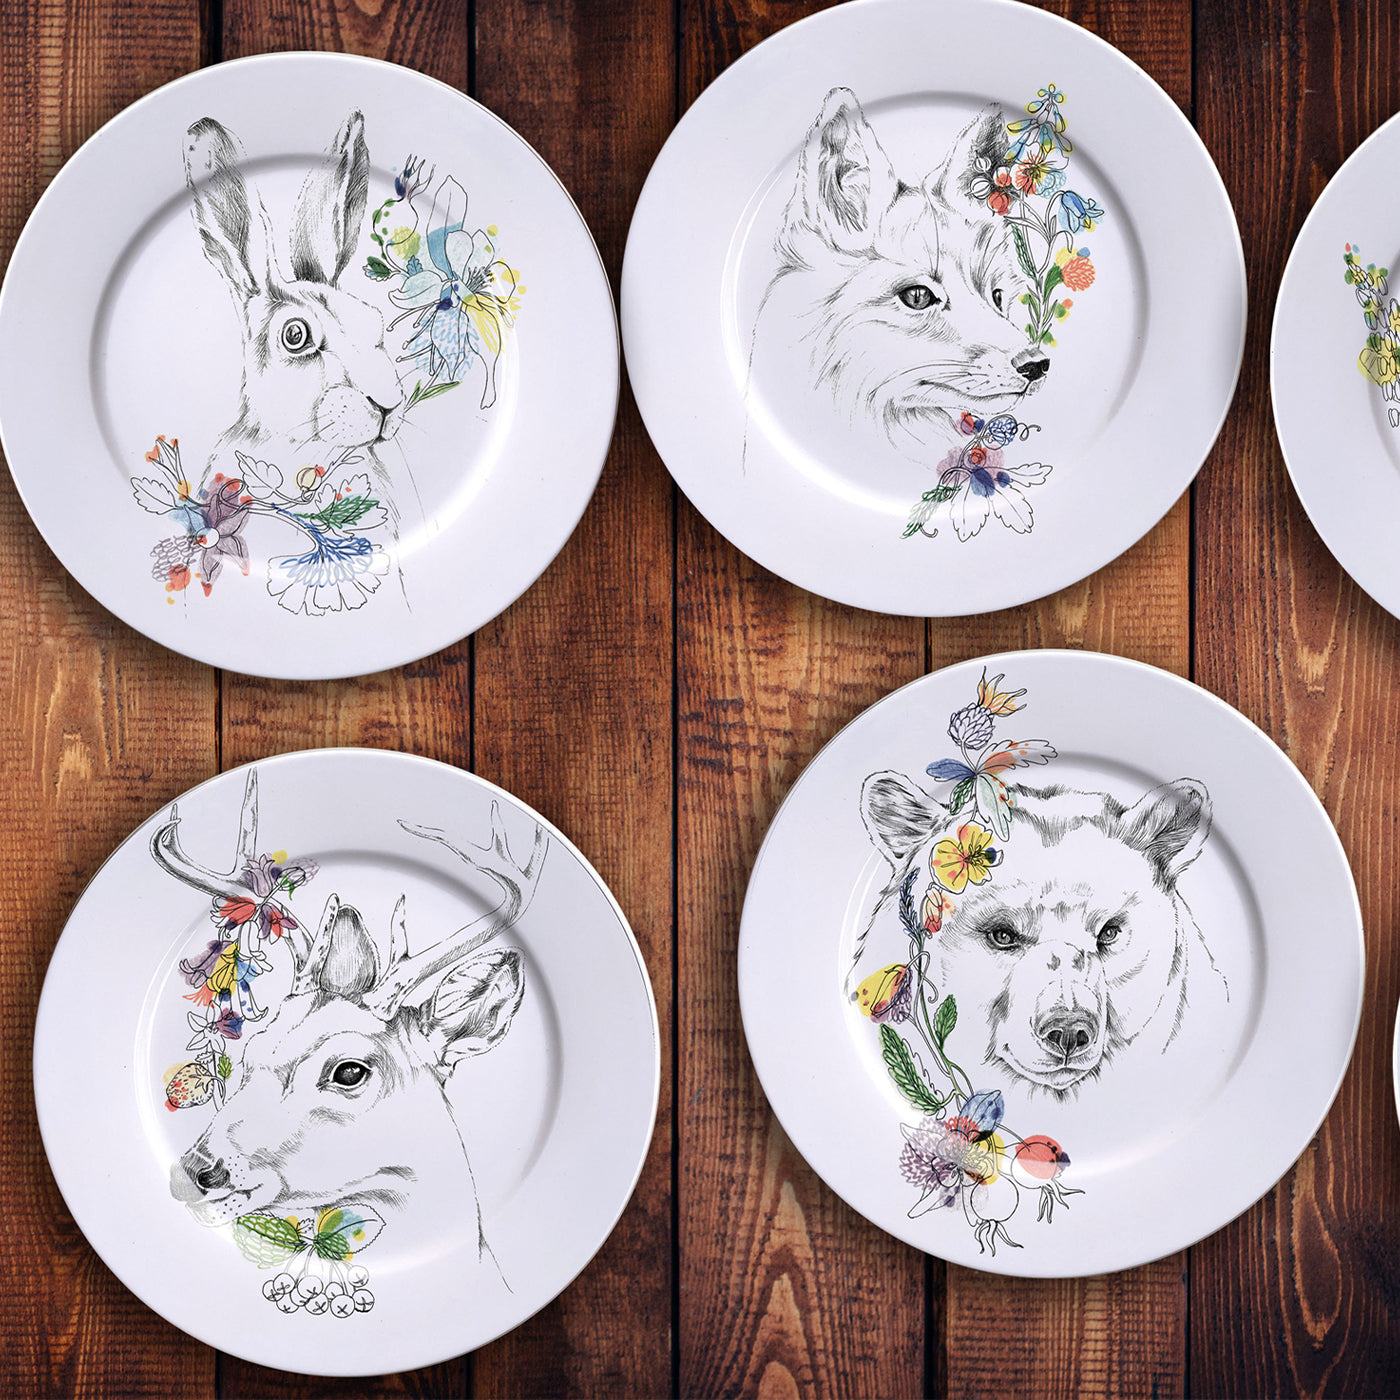 An Ode To The Woods Black Bear Dinner Plate - Alternative view 1